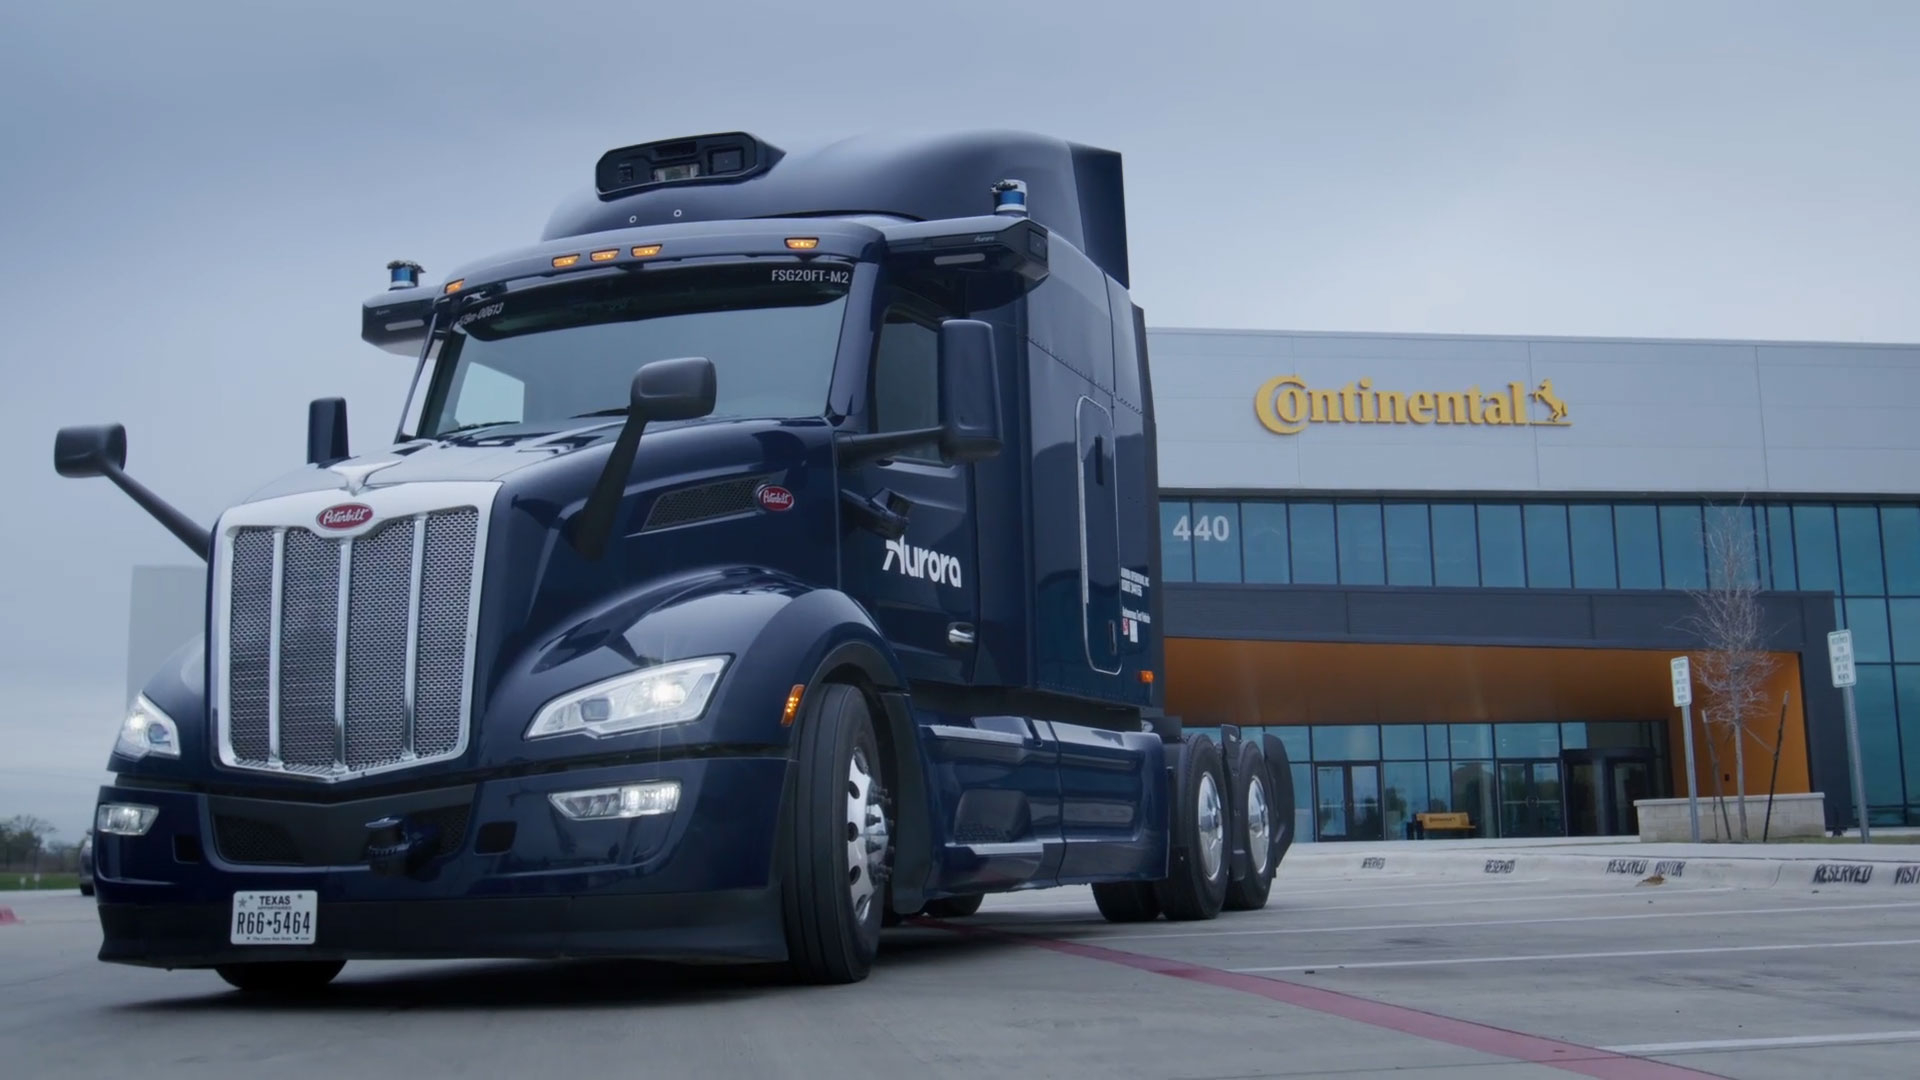 Continental and Aurora reach partnership milestone by finalising design of world’s first scalable autonomous trucking system